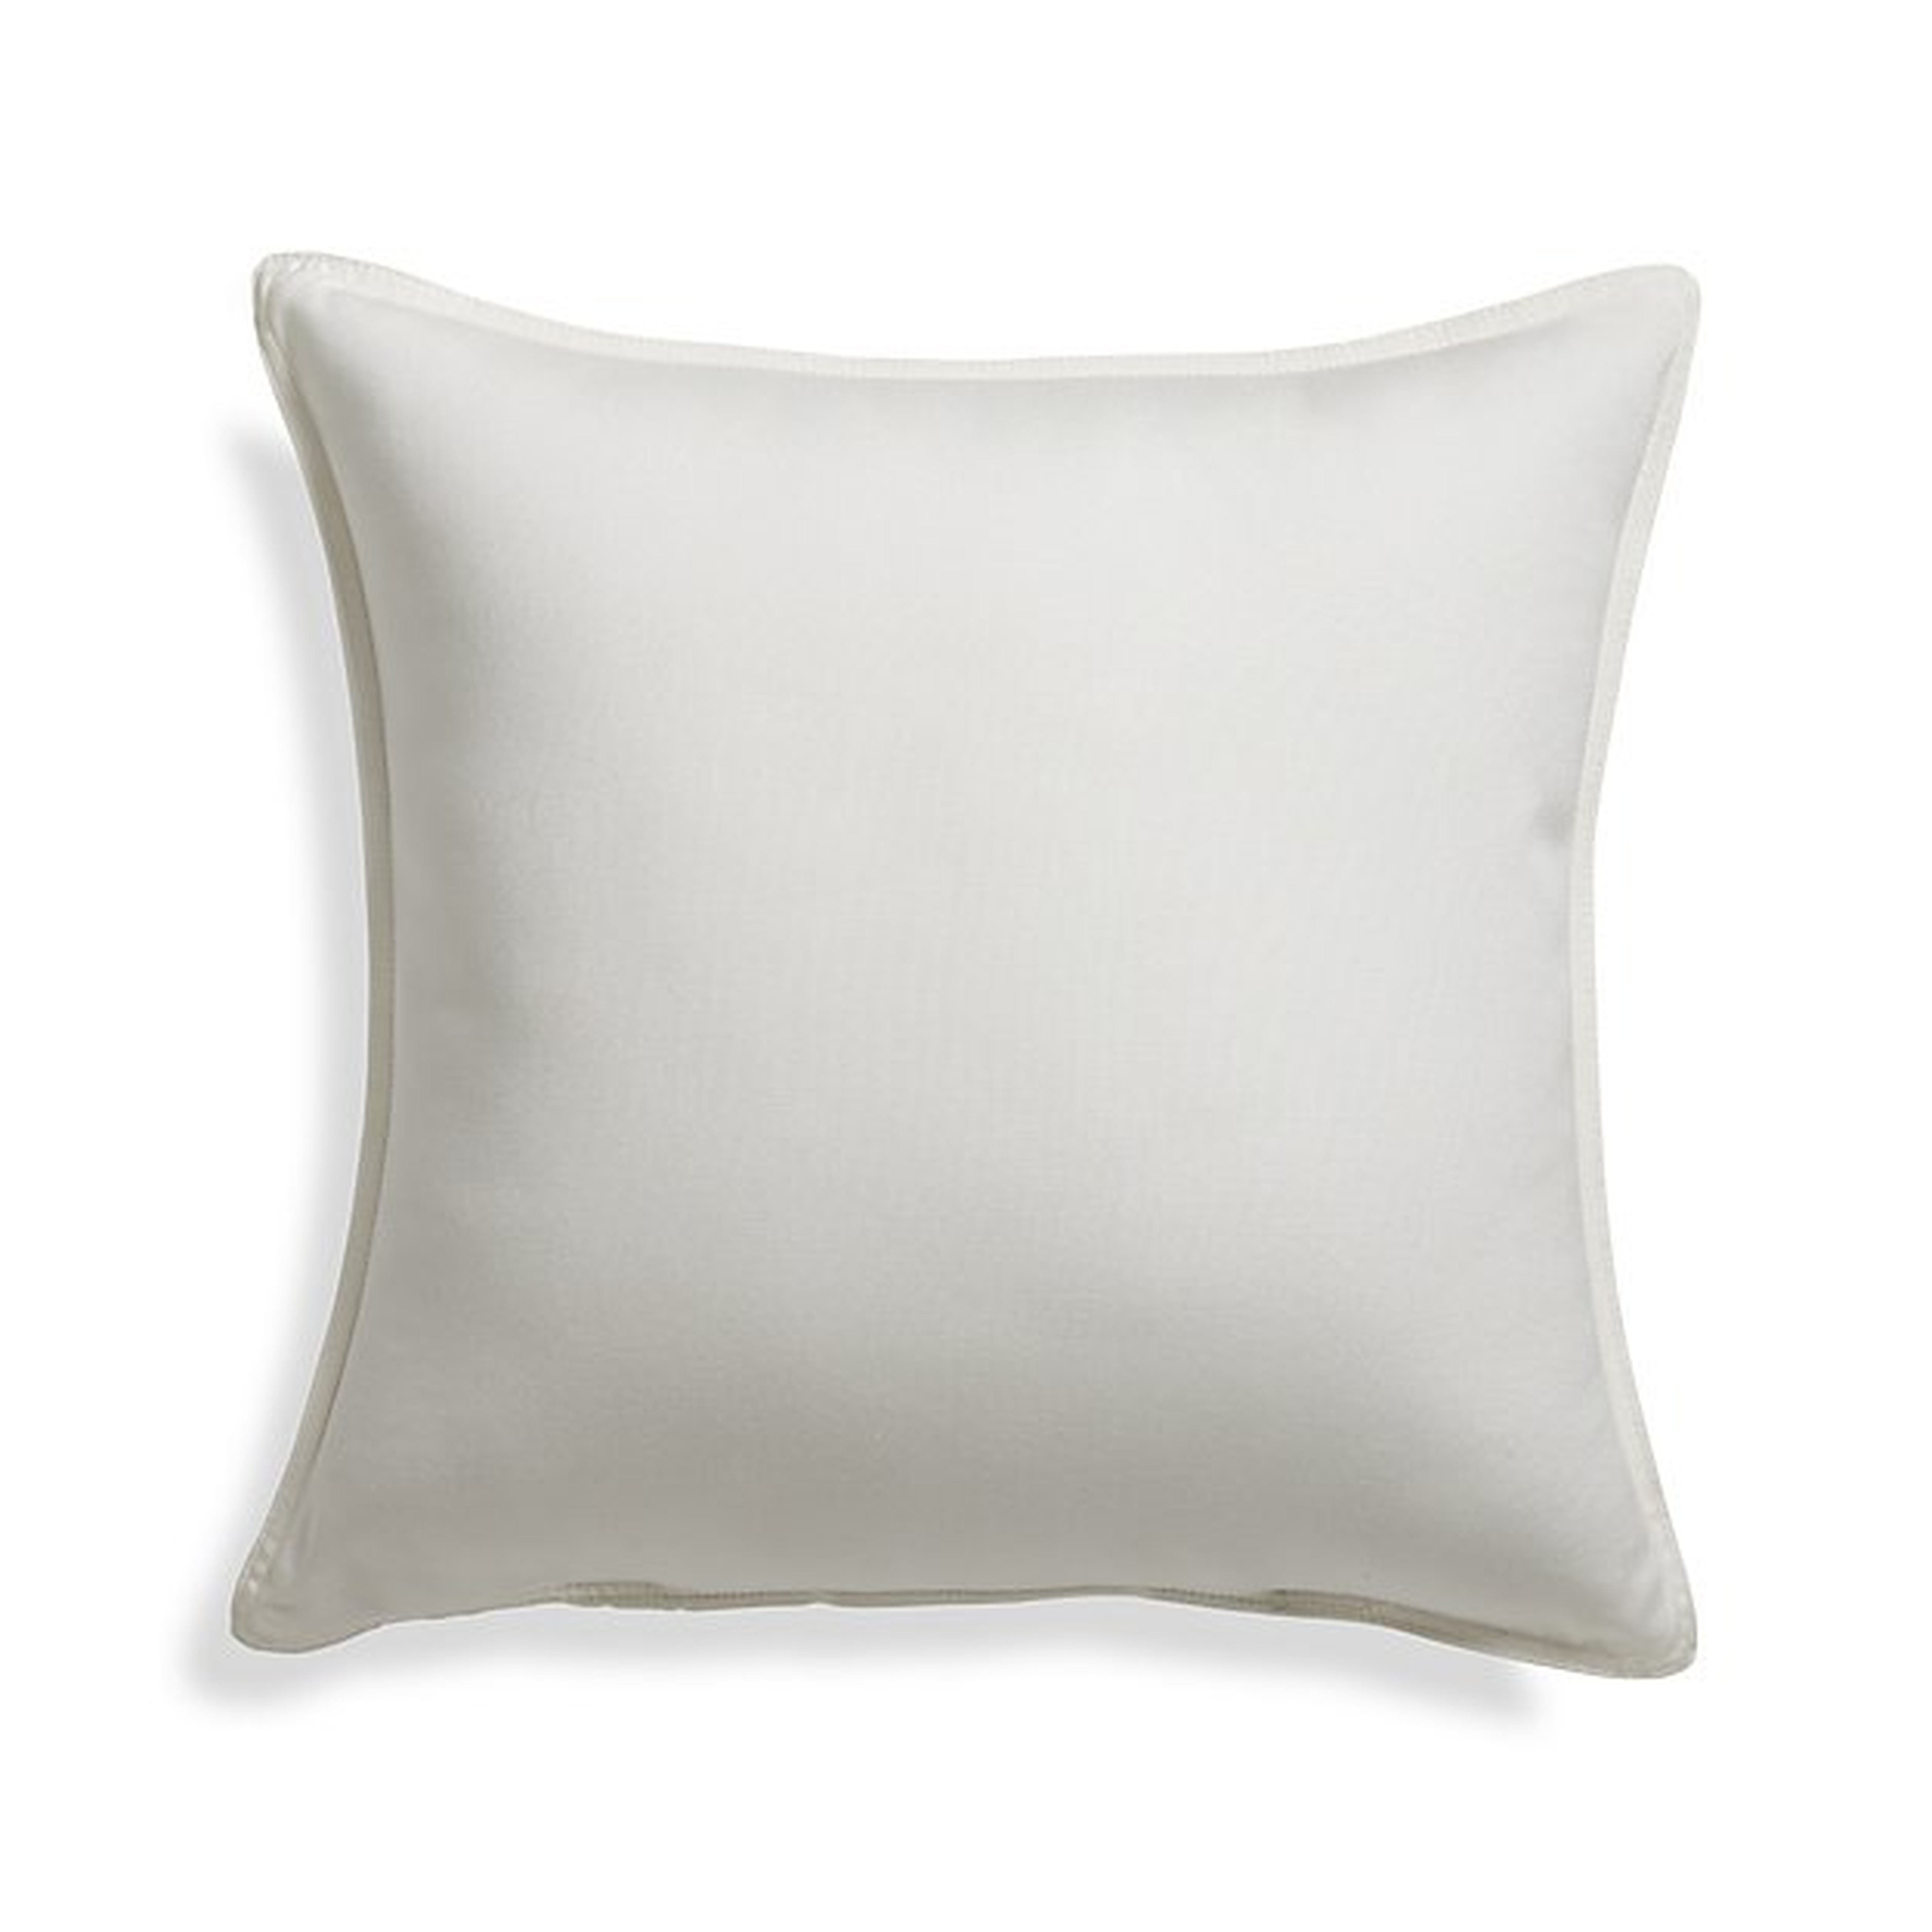 Sunbrella Â® White Sand 20" Sq. Outdoor Pillow (With polyester fiberfill) - Crate and Barrel